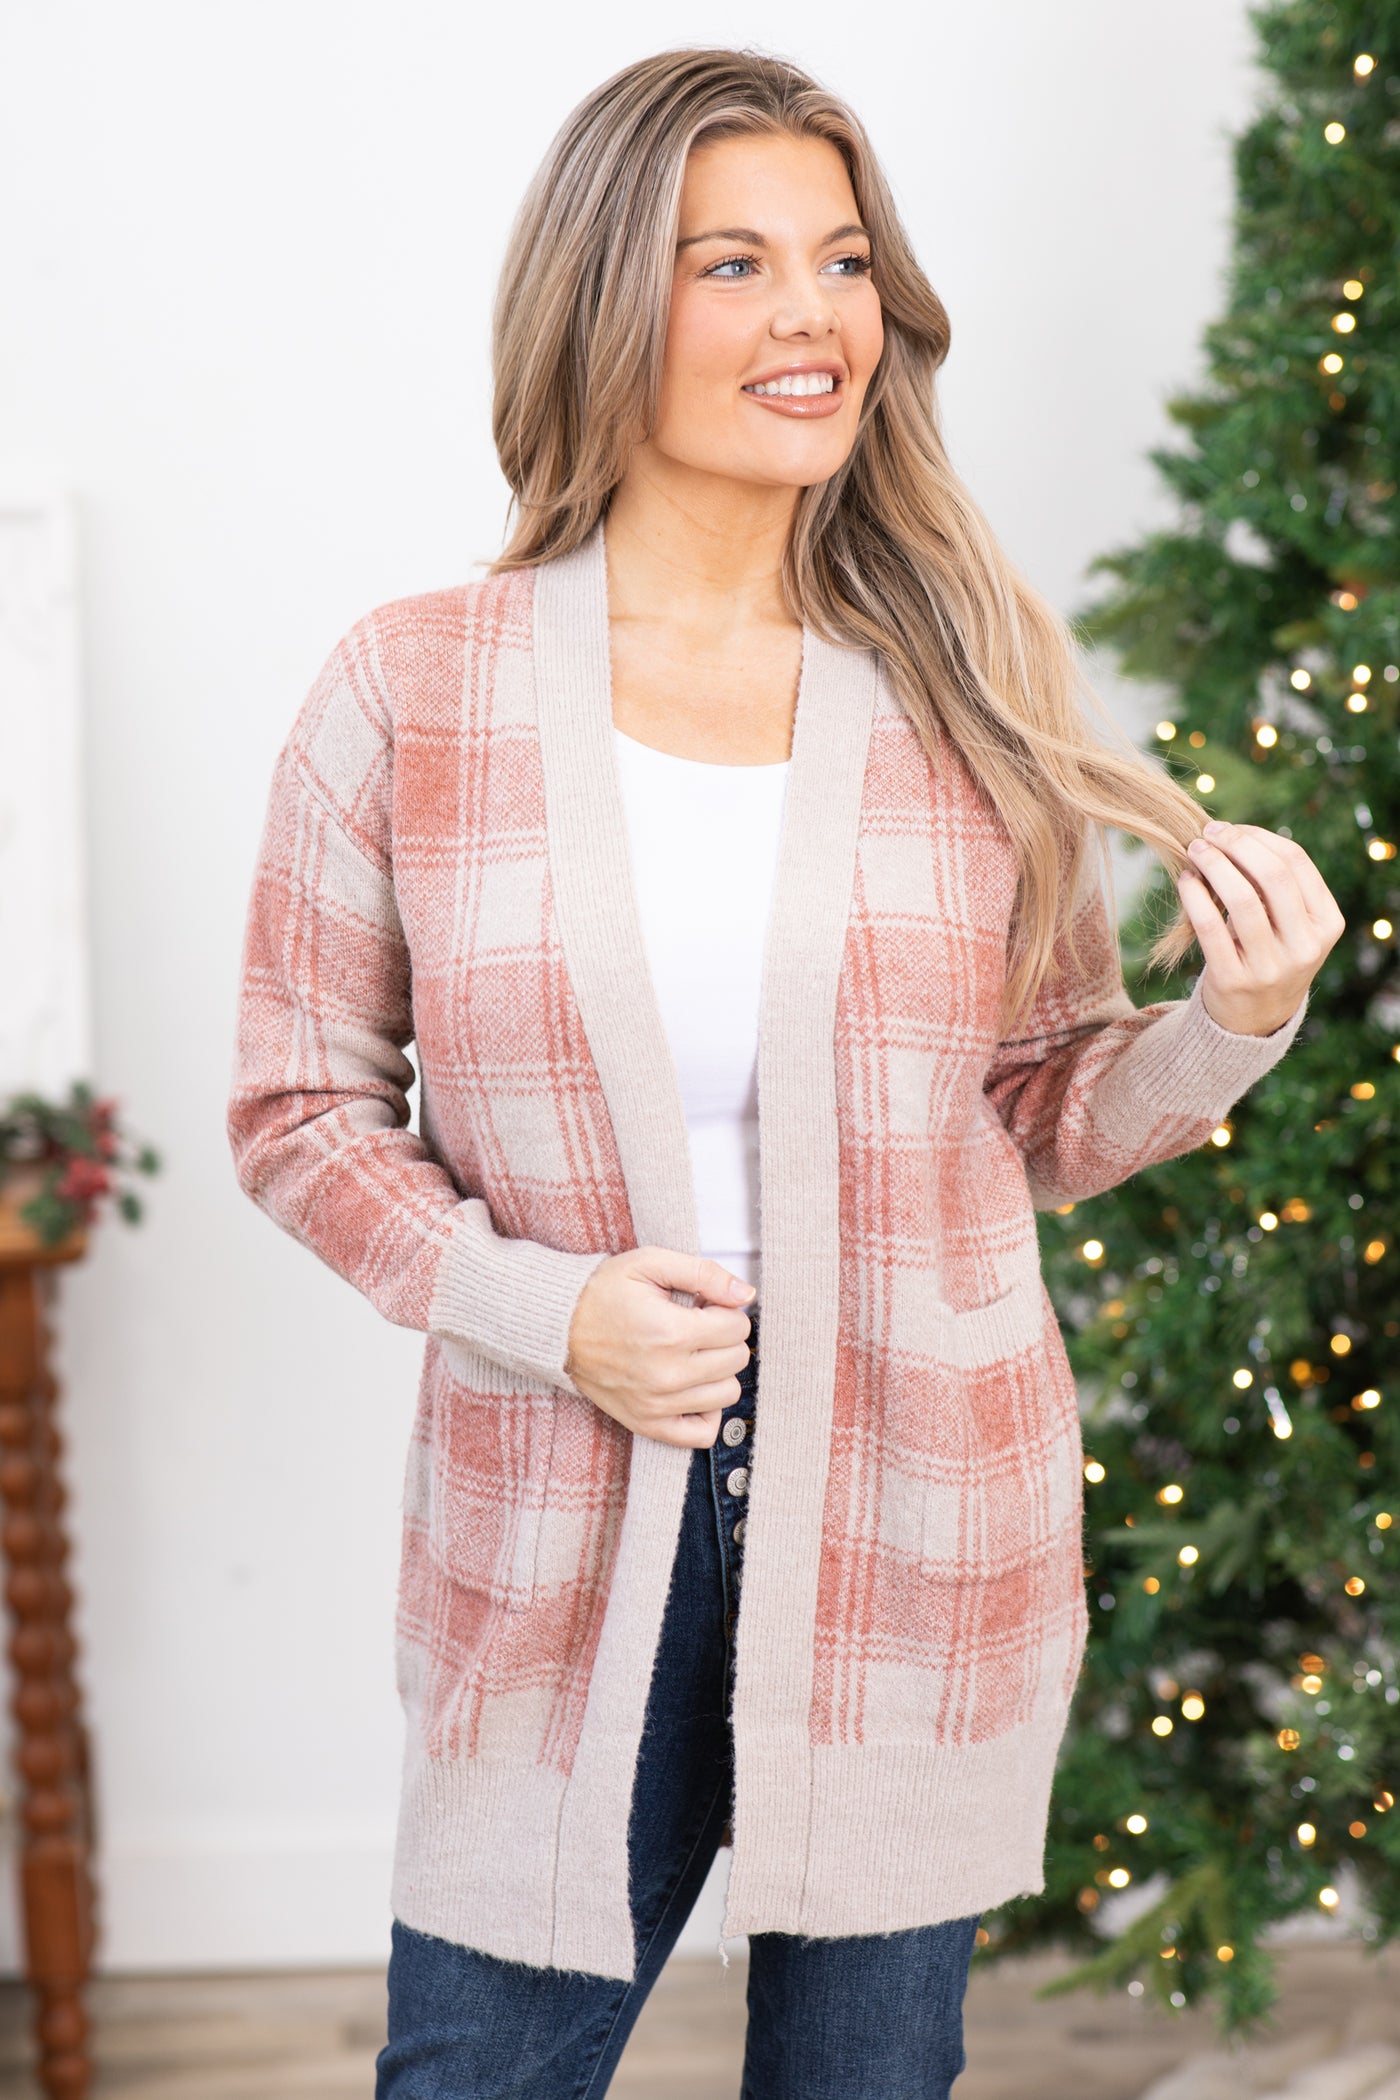 Dusty Rose and Beige Plaid Cardigan